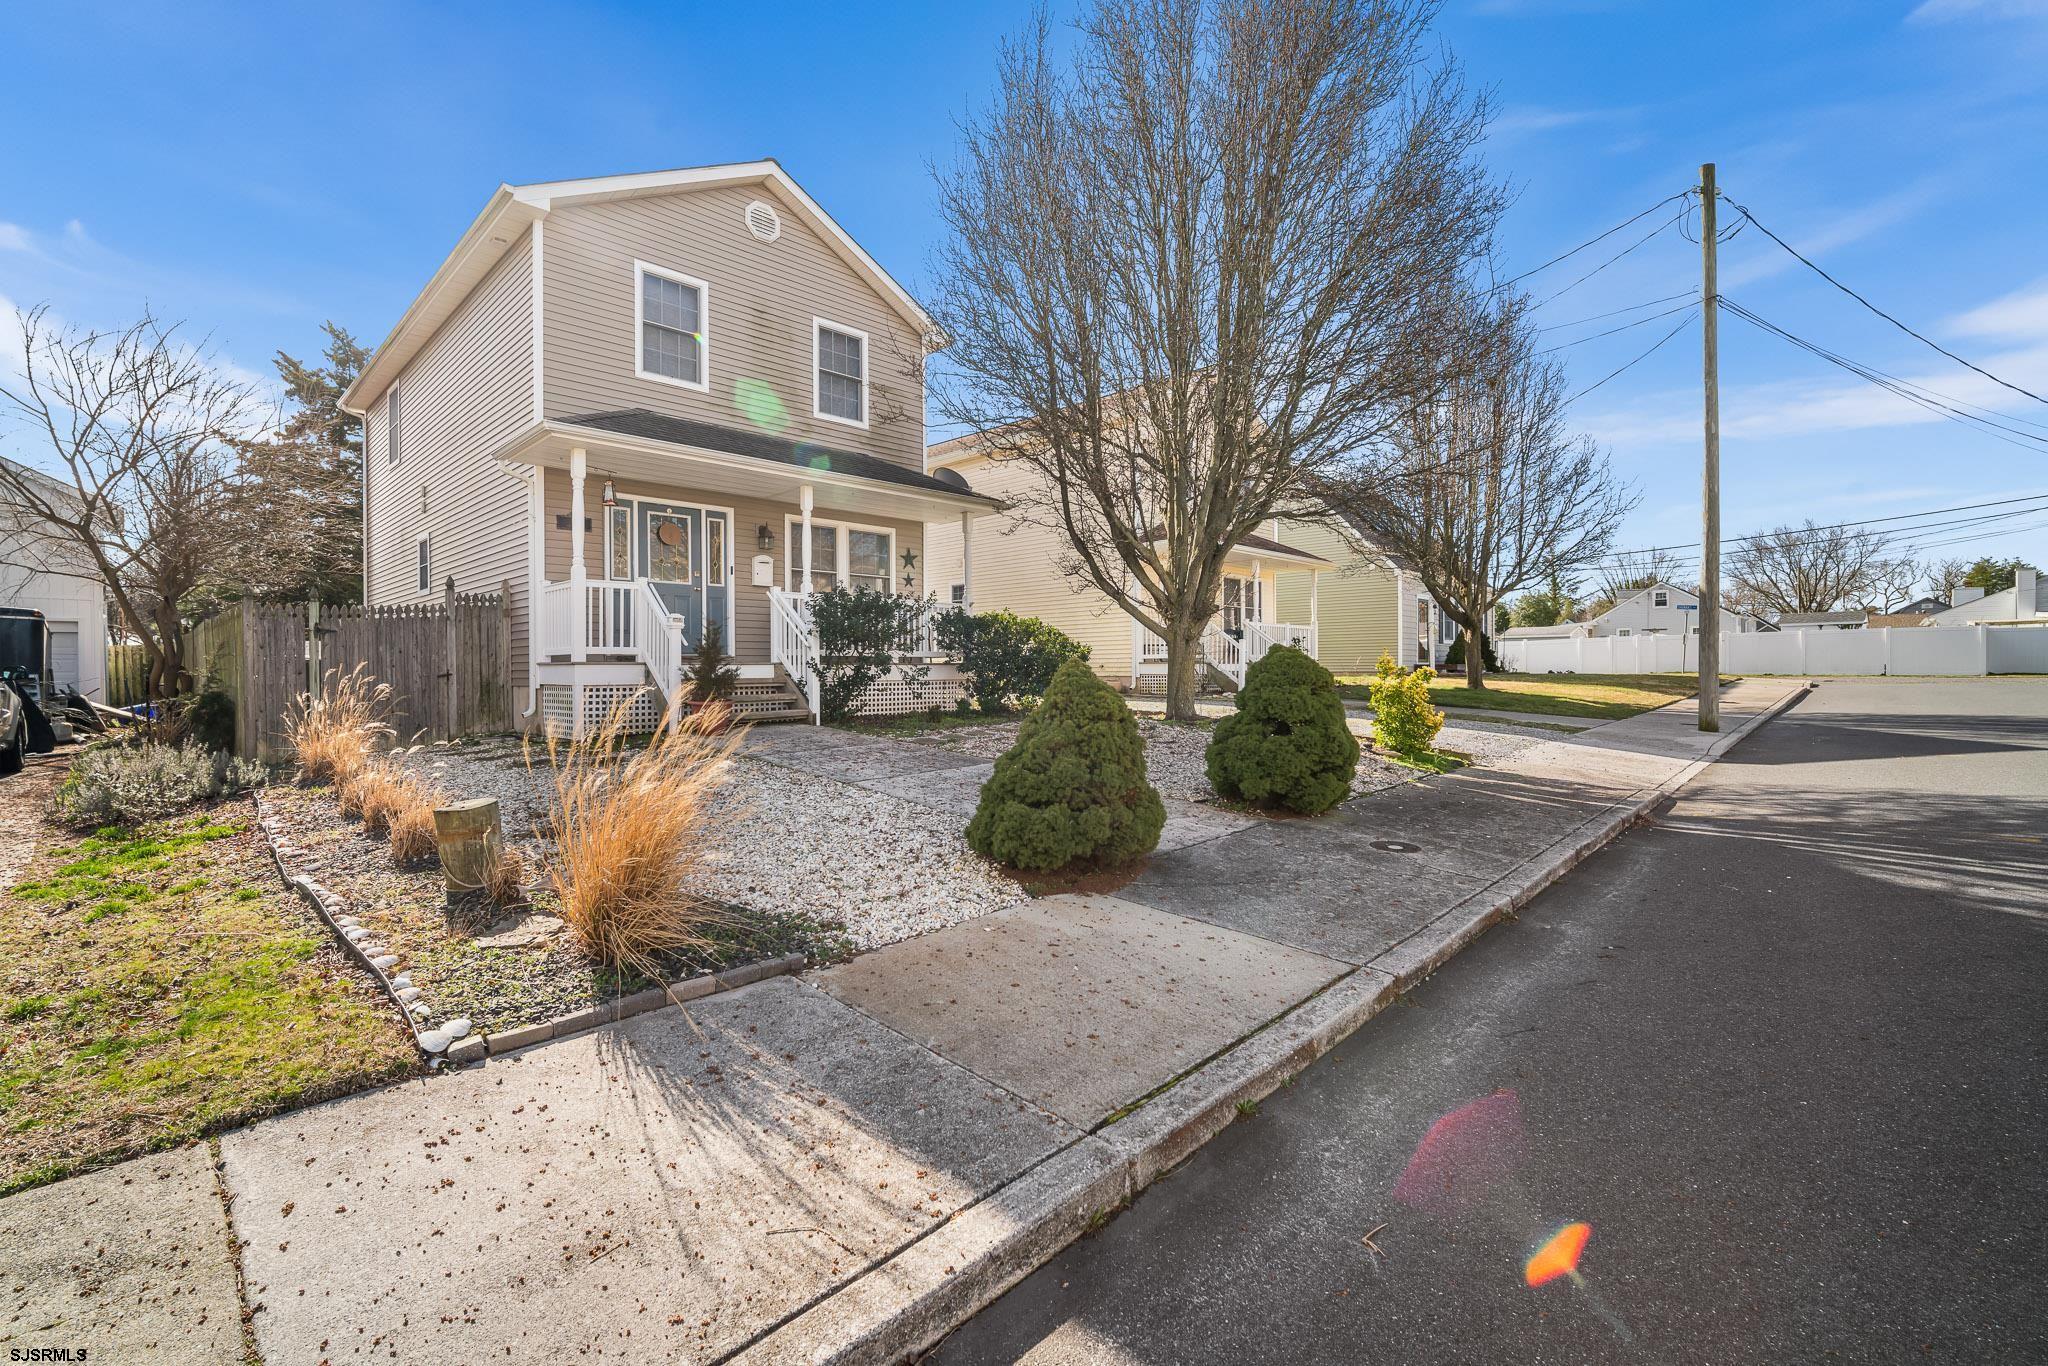 118 Cleveland Ave, Somers Point, NJ 08244